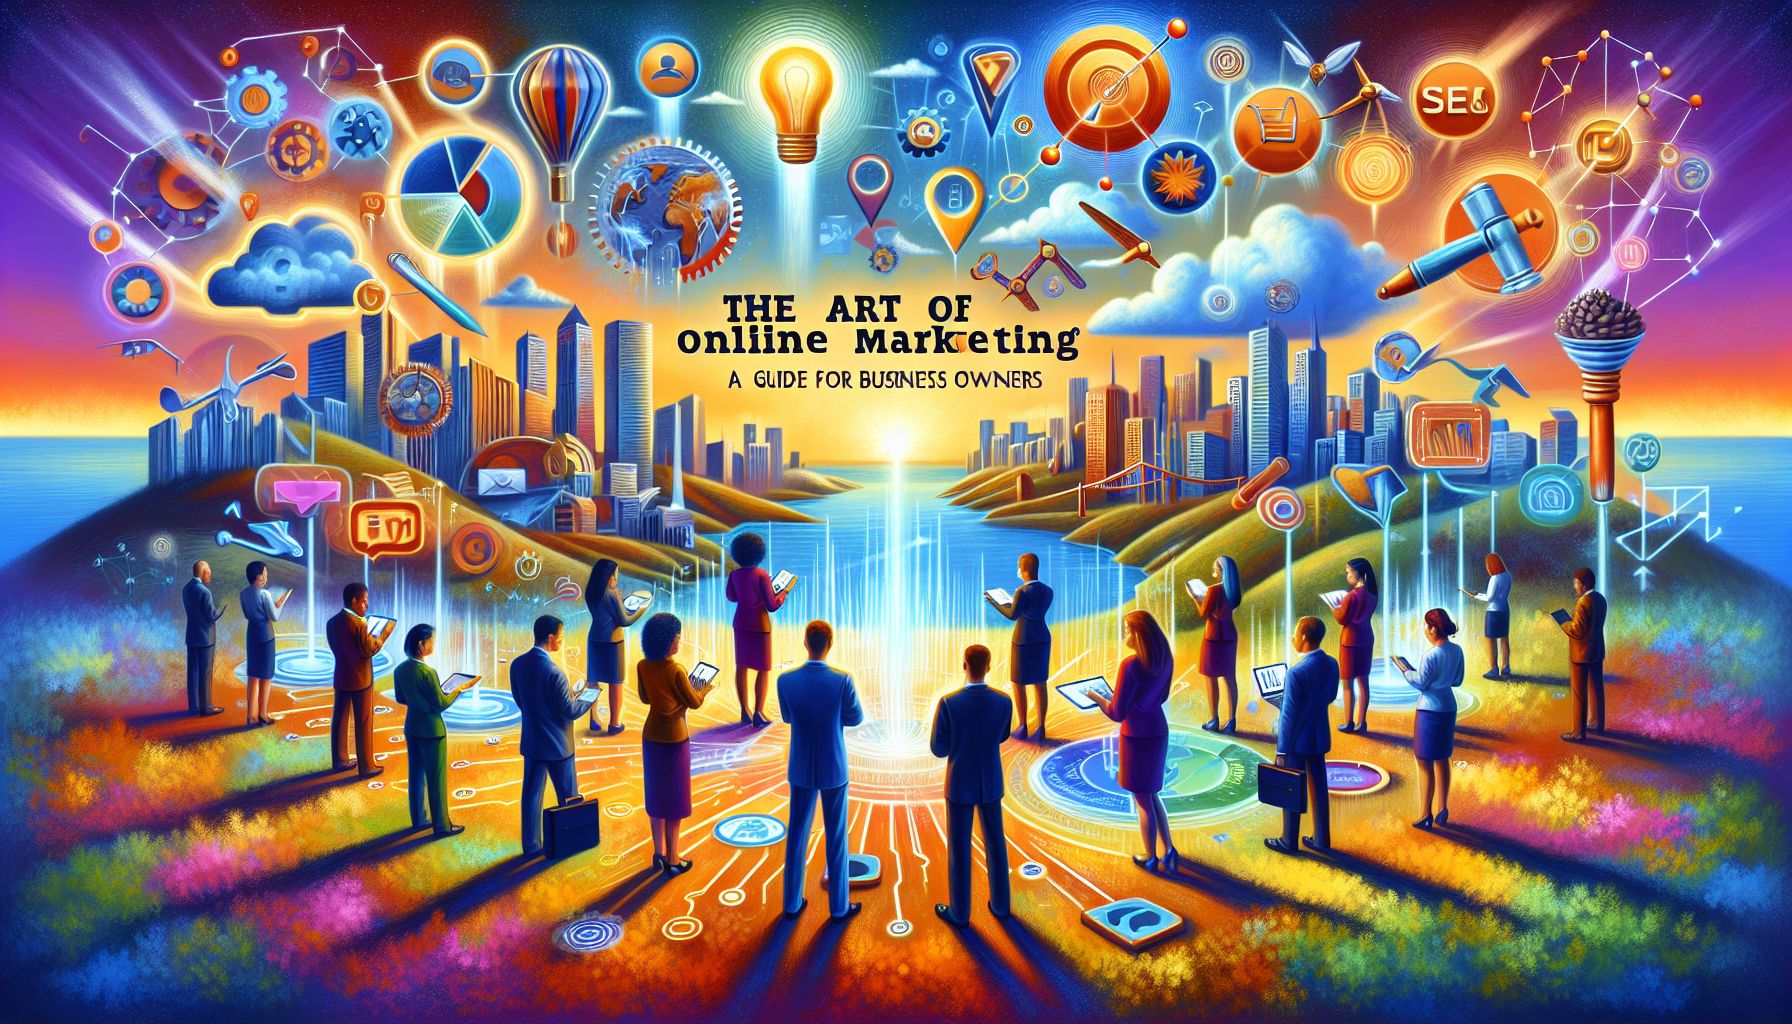 The Art of Online Marketing: A Guide for Business Owners